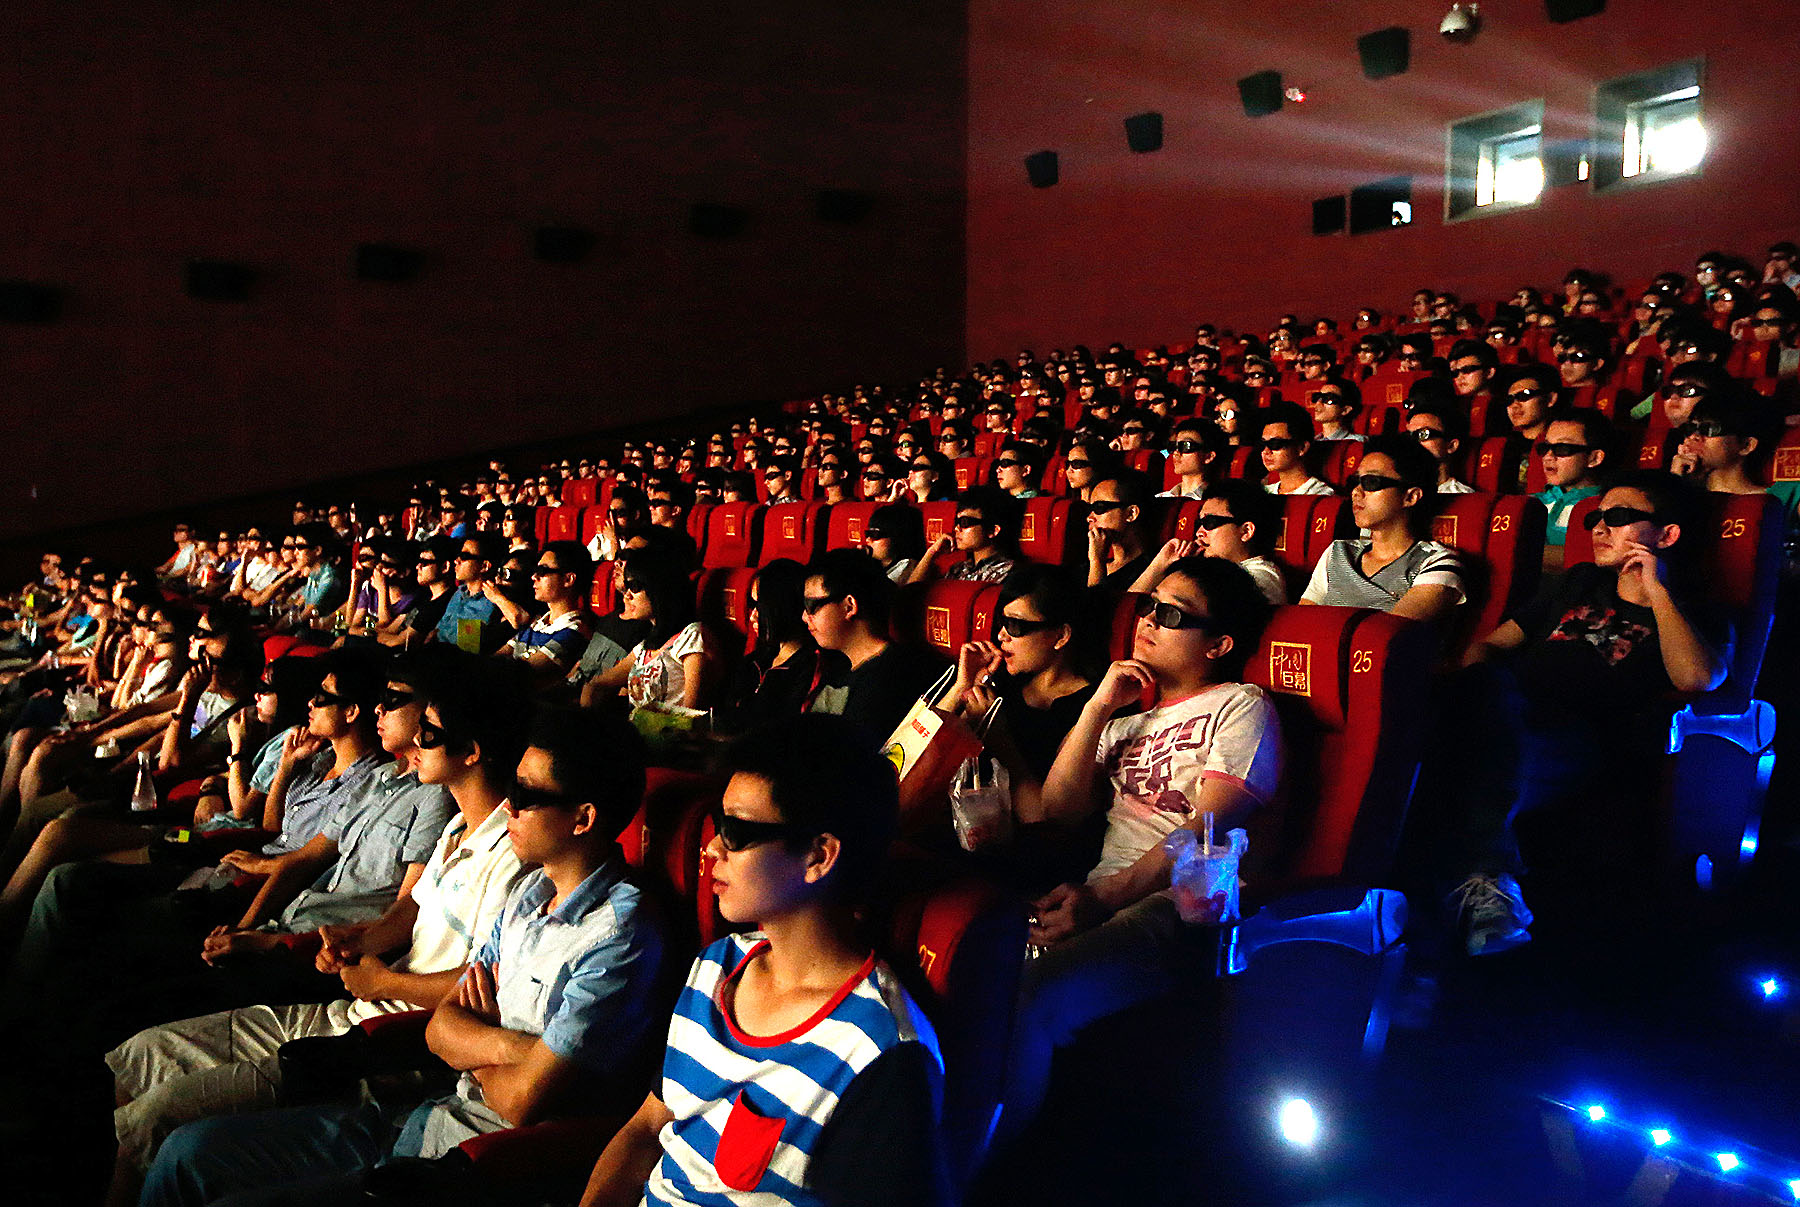 Audience watch the 3D film 'Transformers - Age Of Extinction' through 3D glasses at a cinema in Wuhan, China.
